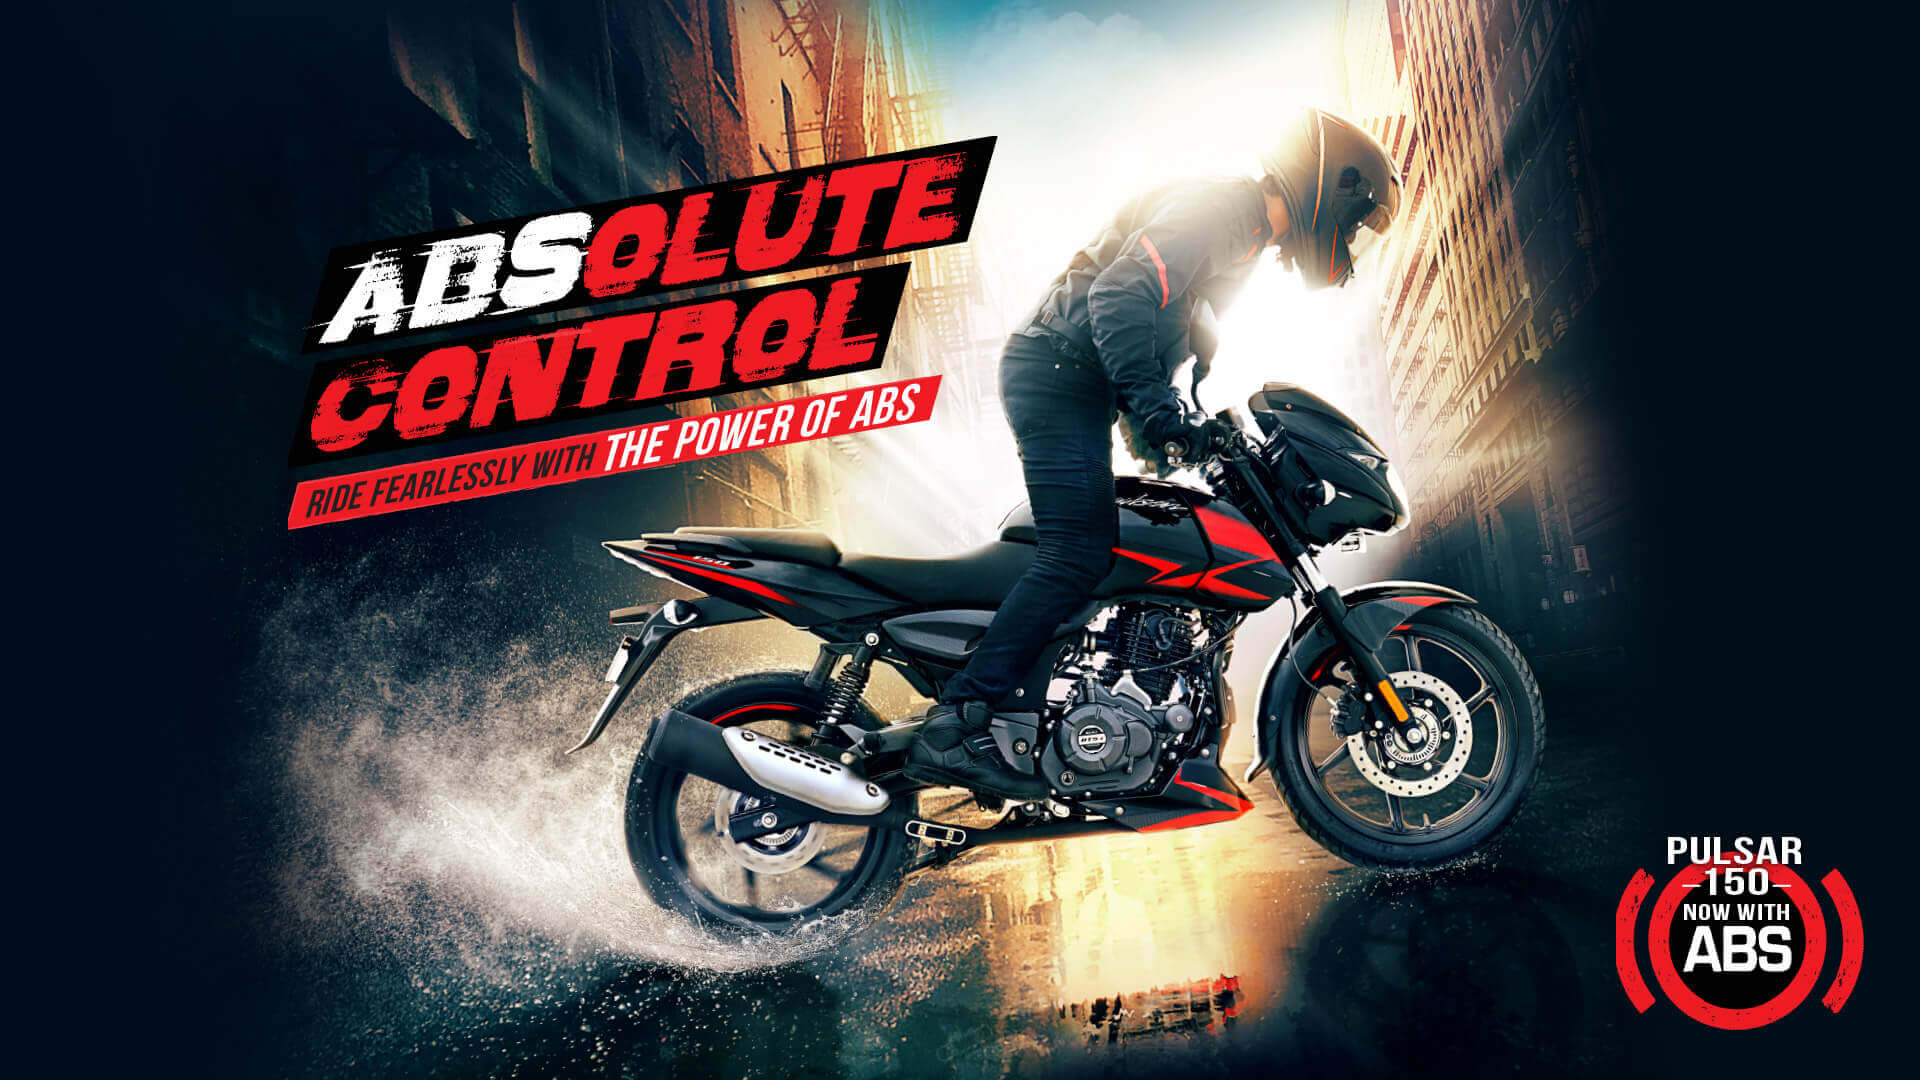 Bajaj Pulsar 150 Twin Disc - Now with ABS for Absolute Control